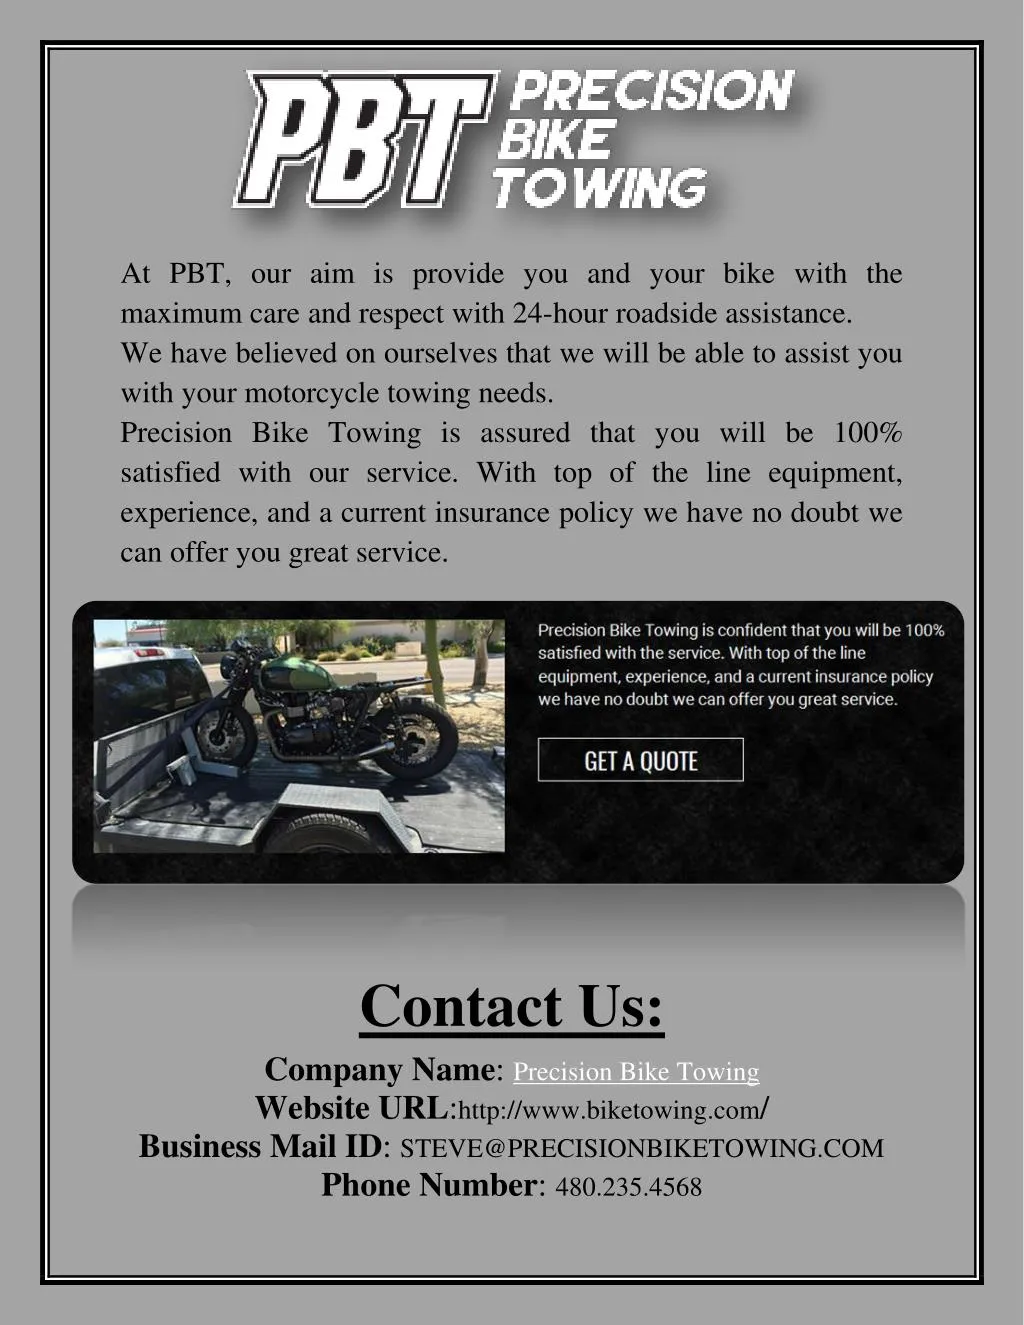 at pbt our aim is provide you and your bike with n.